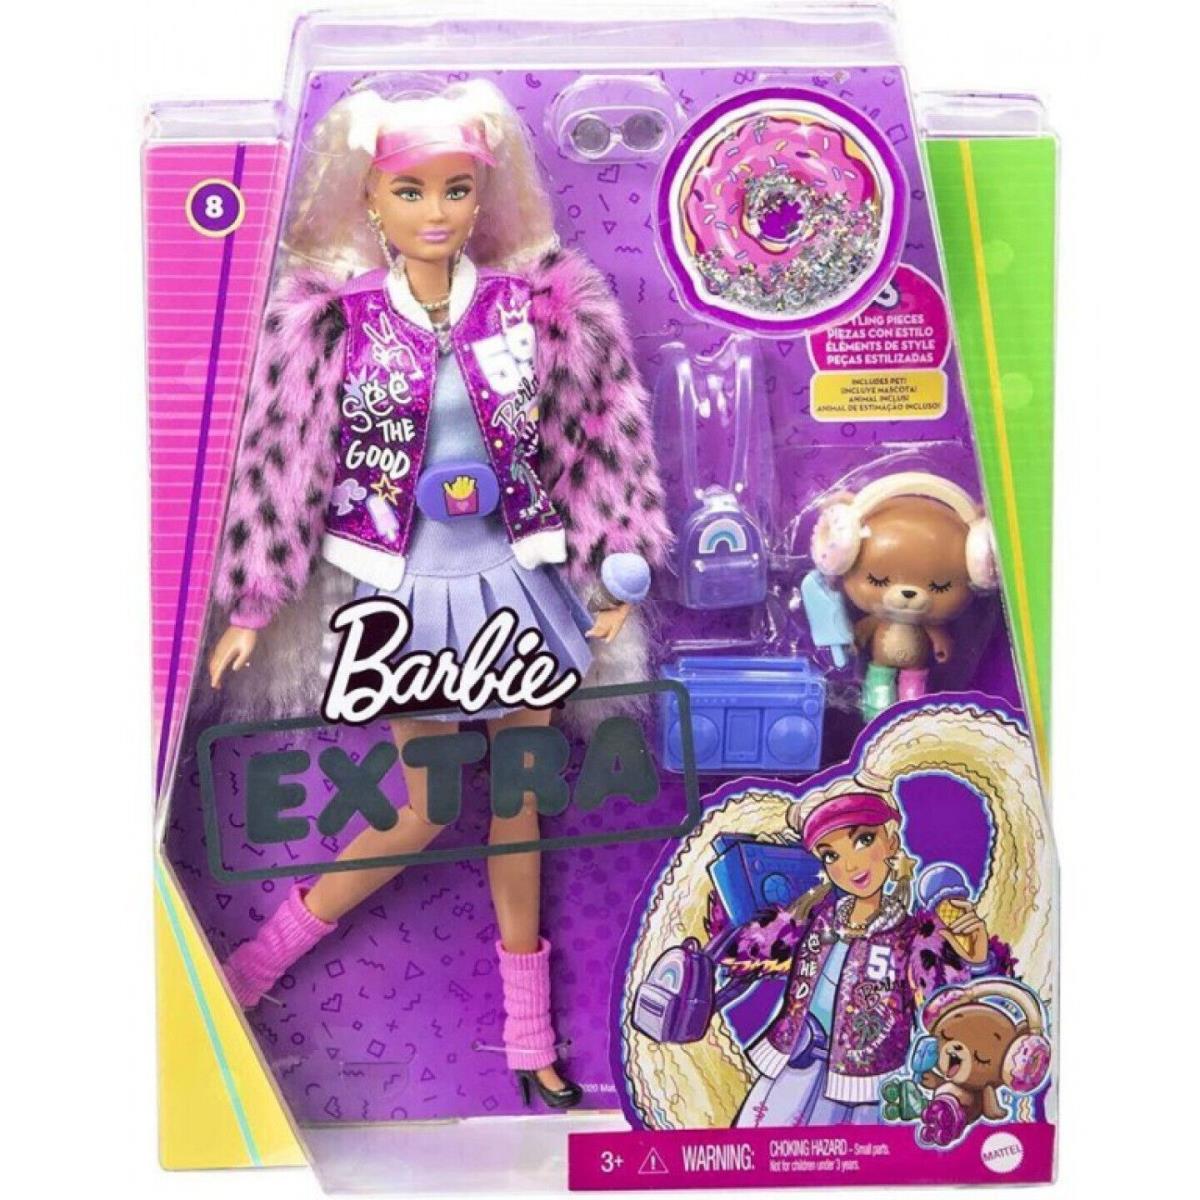 Barbie Extra Doll 8 GYJ77 in Varsity Jacket with Furry Arms Pet Teddy Bear